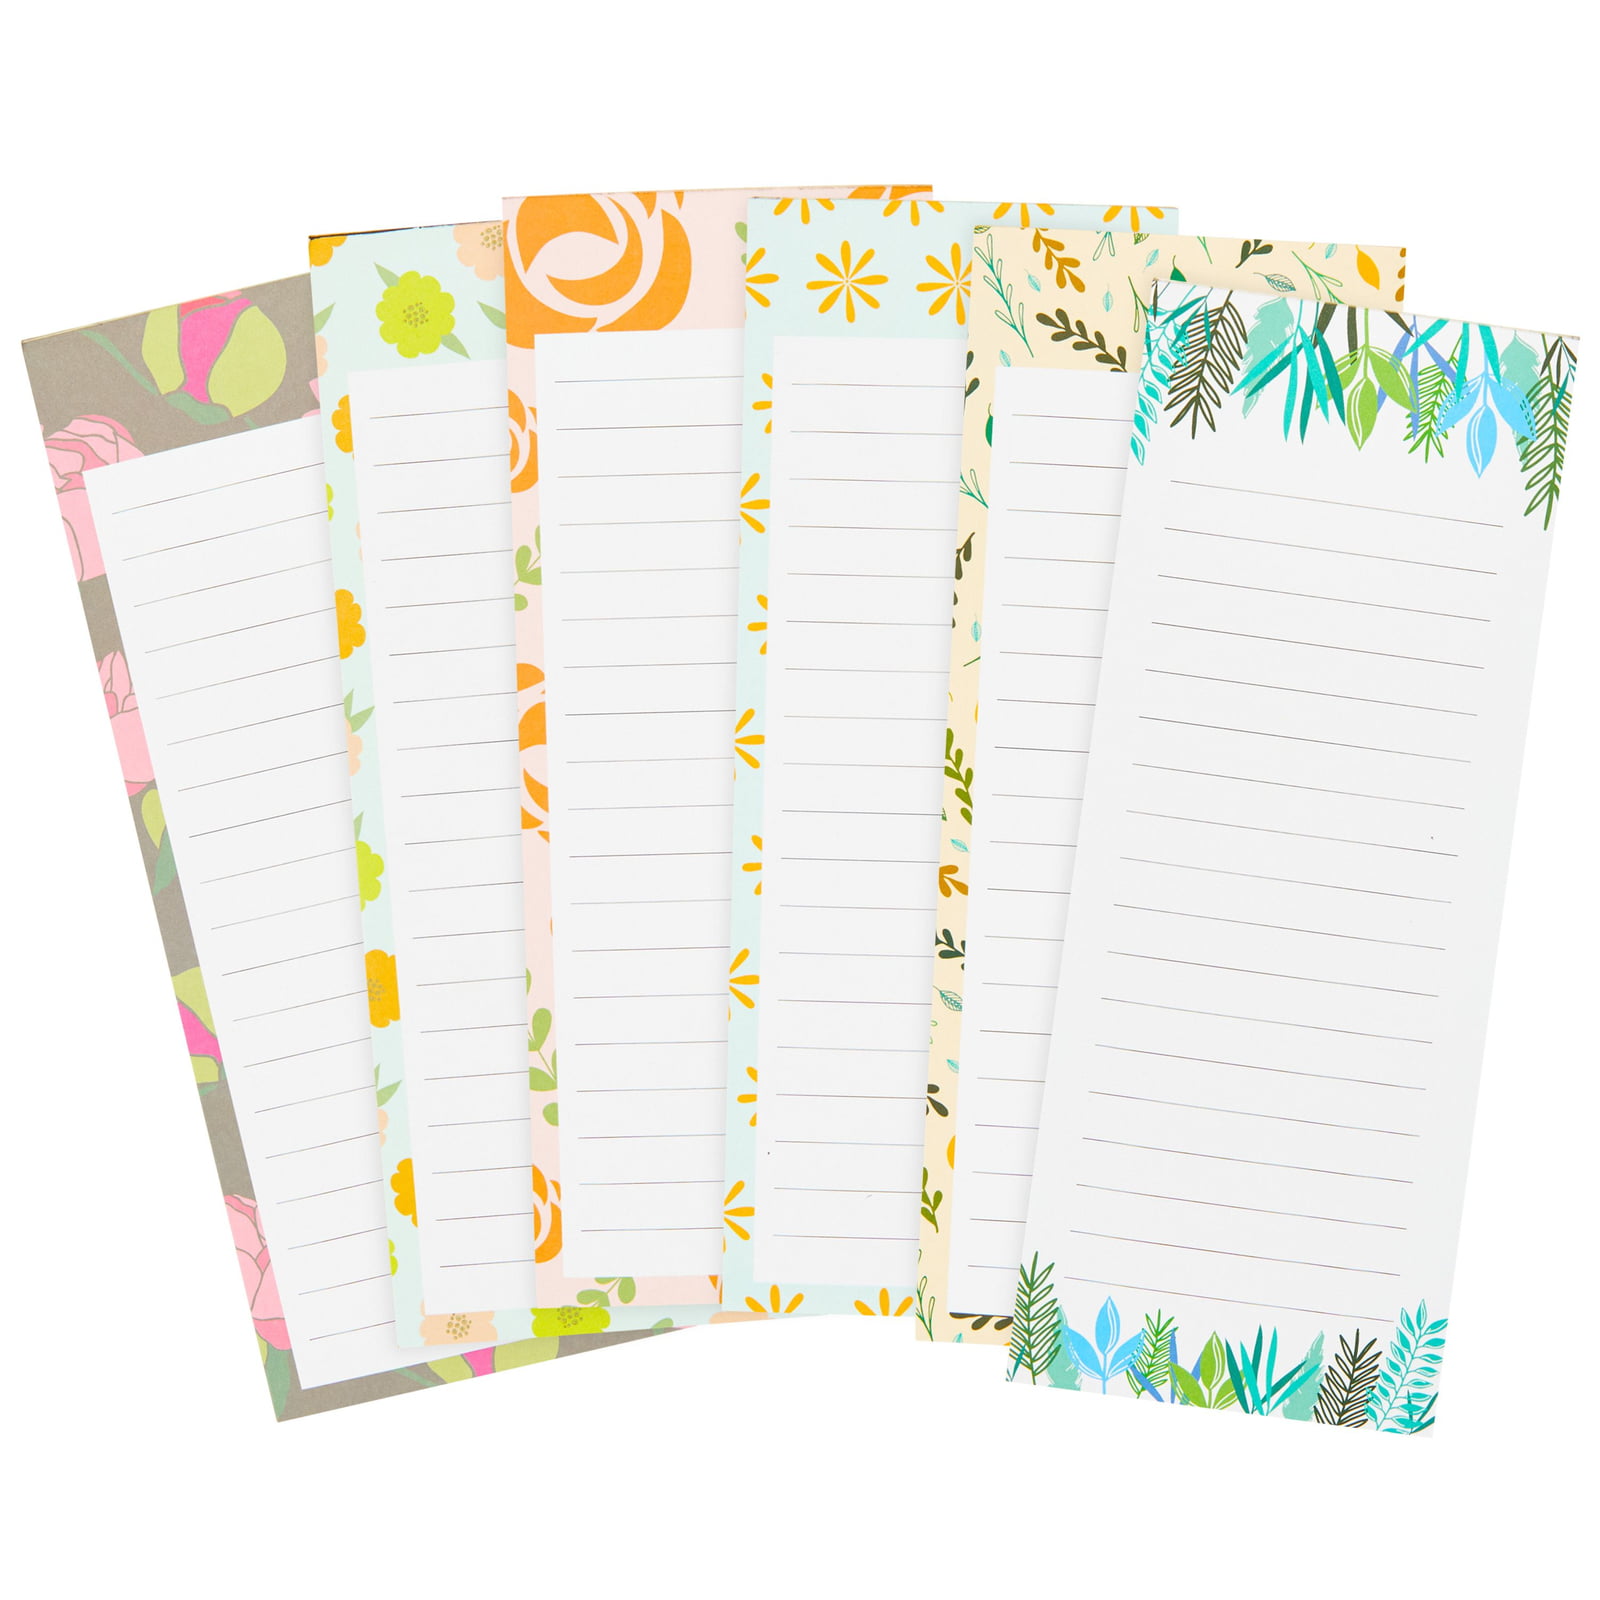 4.25 x 5.5 4-Pack Multi-Color Personalized Notepads 1/4-Page Memo Scratch Pads 